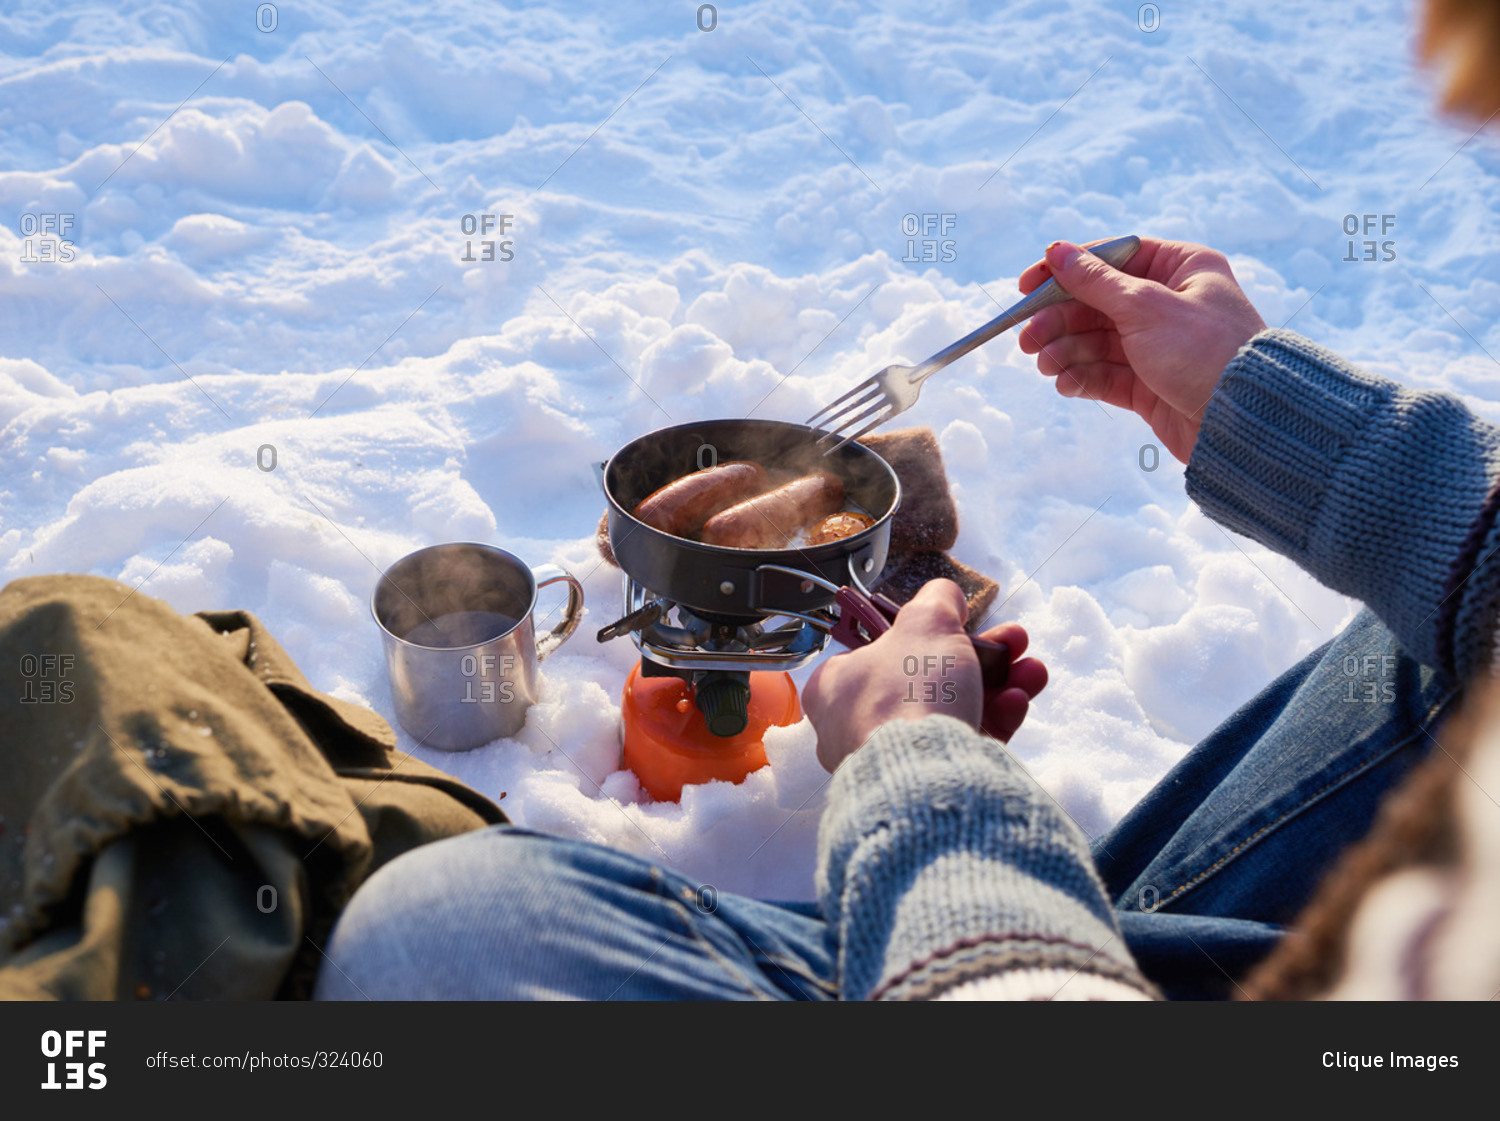 Man stirring sausages in a pot in the snow